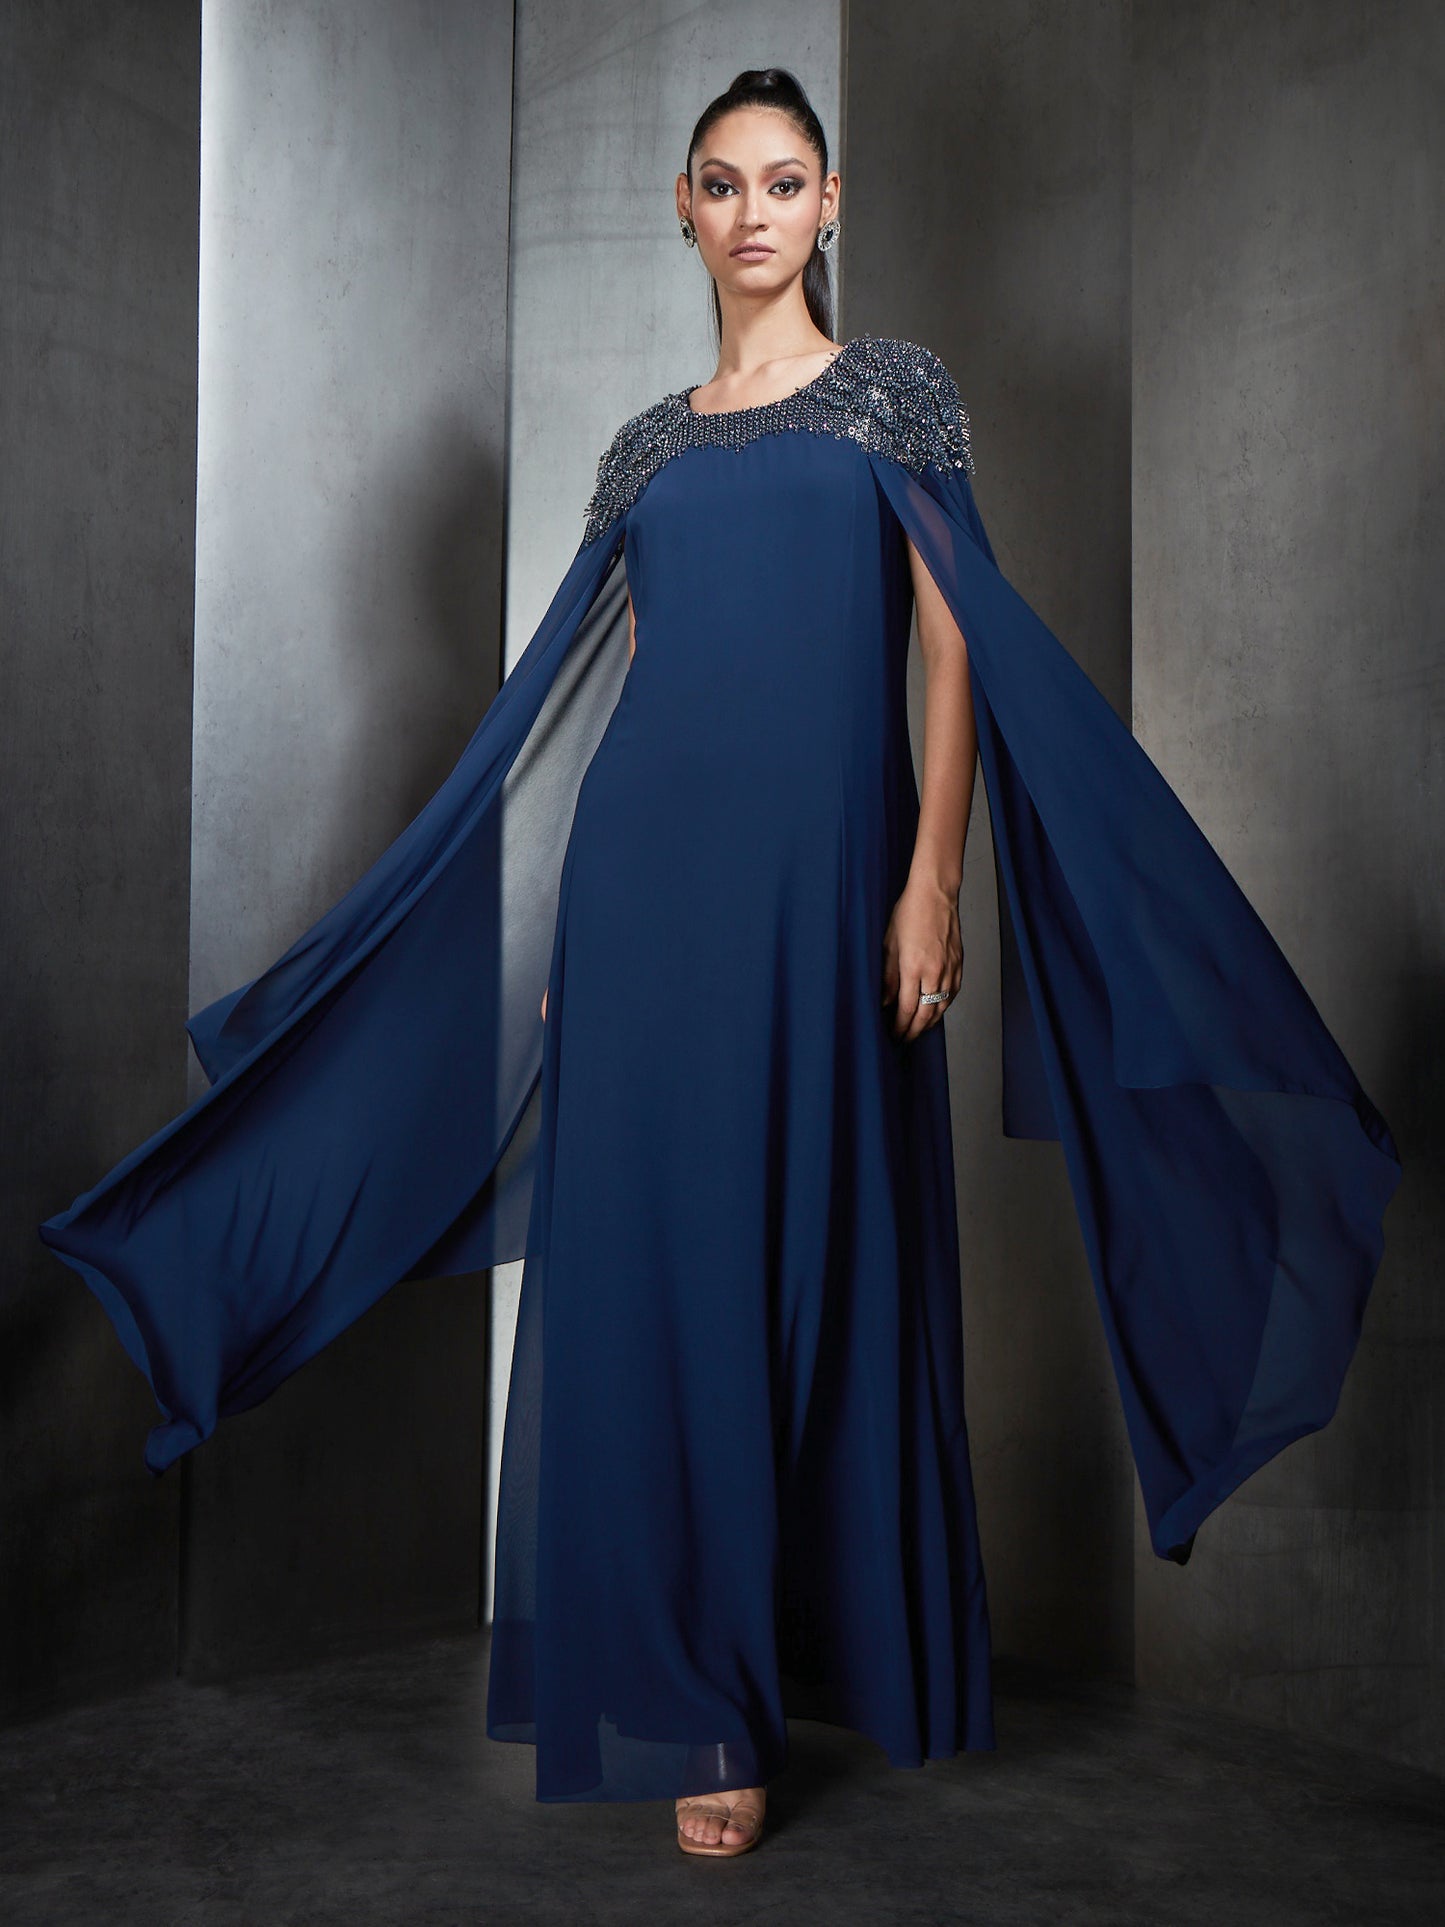 Galaxy Blue Embroidered Long Dress With Cape Sleeves